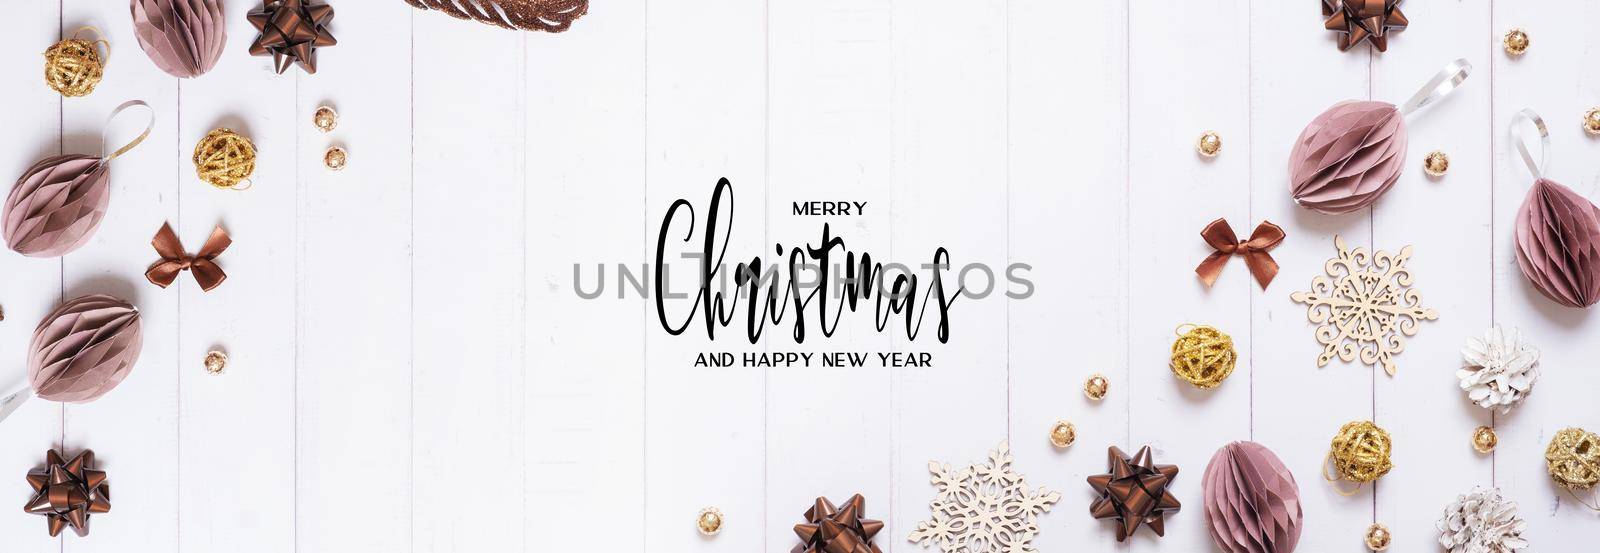 Merrry Christmas and Happy new year greeting card with composition flat lay on wooden background by ssvimaliss